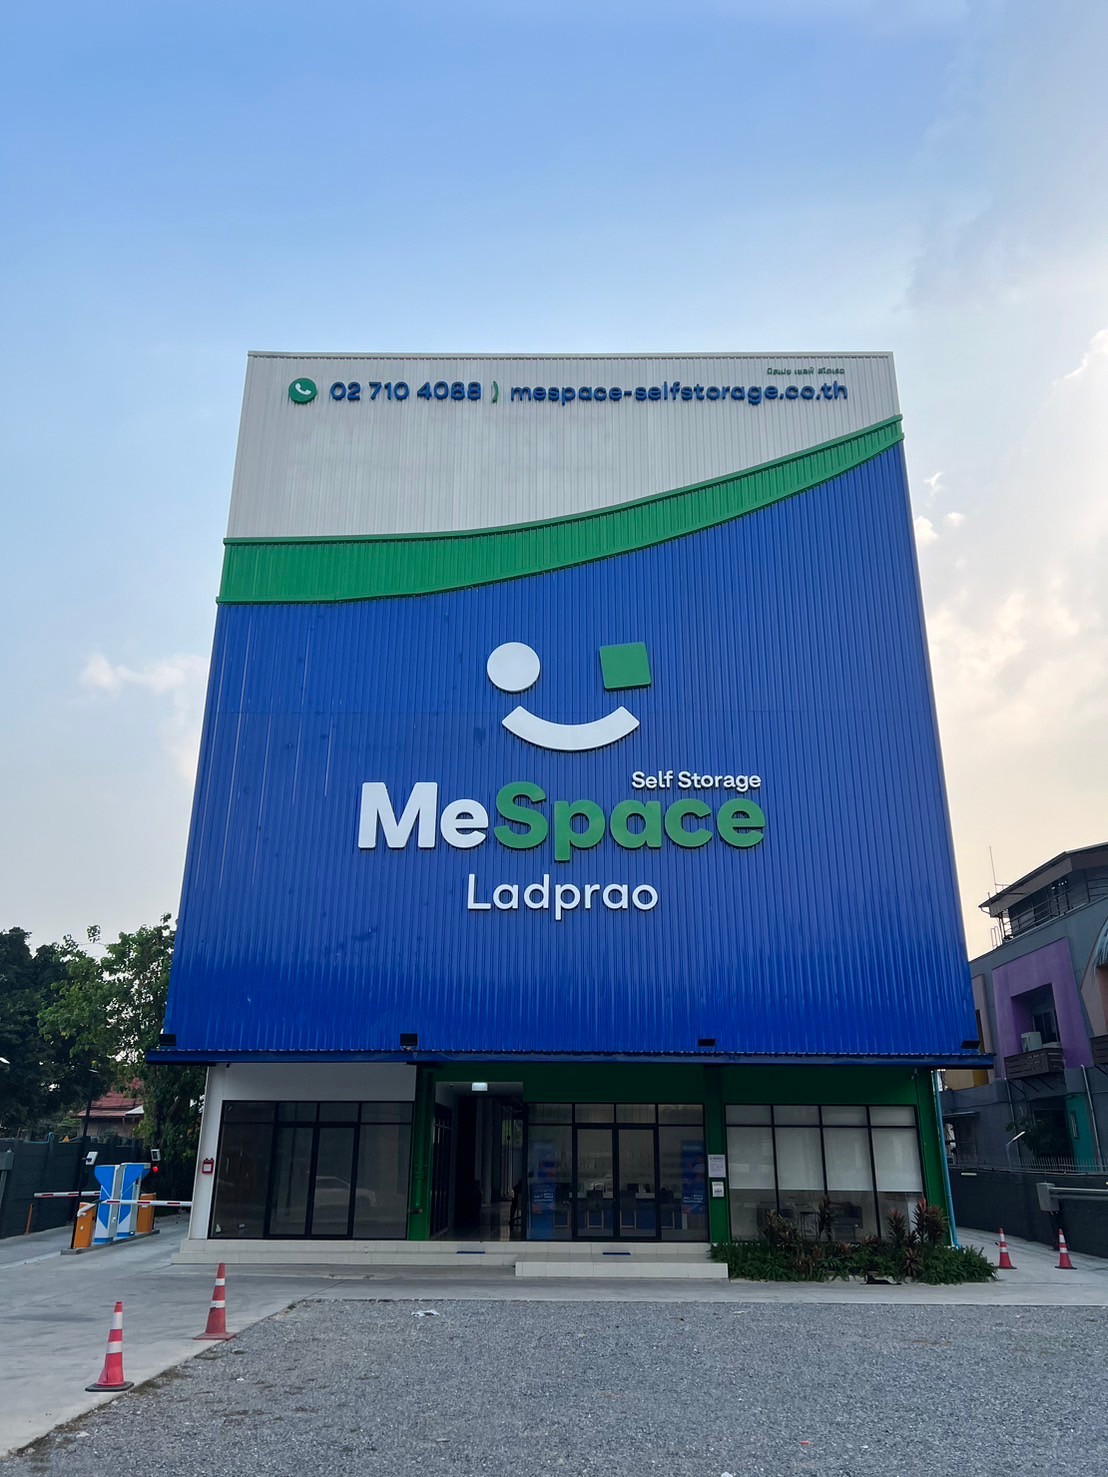 JWD launches ‘JWD Store It!’ Ladprao branch on auspicious day – ‘9.9’ Largest storage space of 4,000 sq. m., with drive-in and single-room services